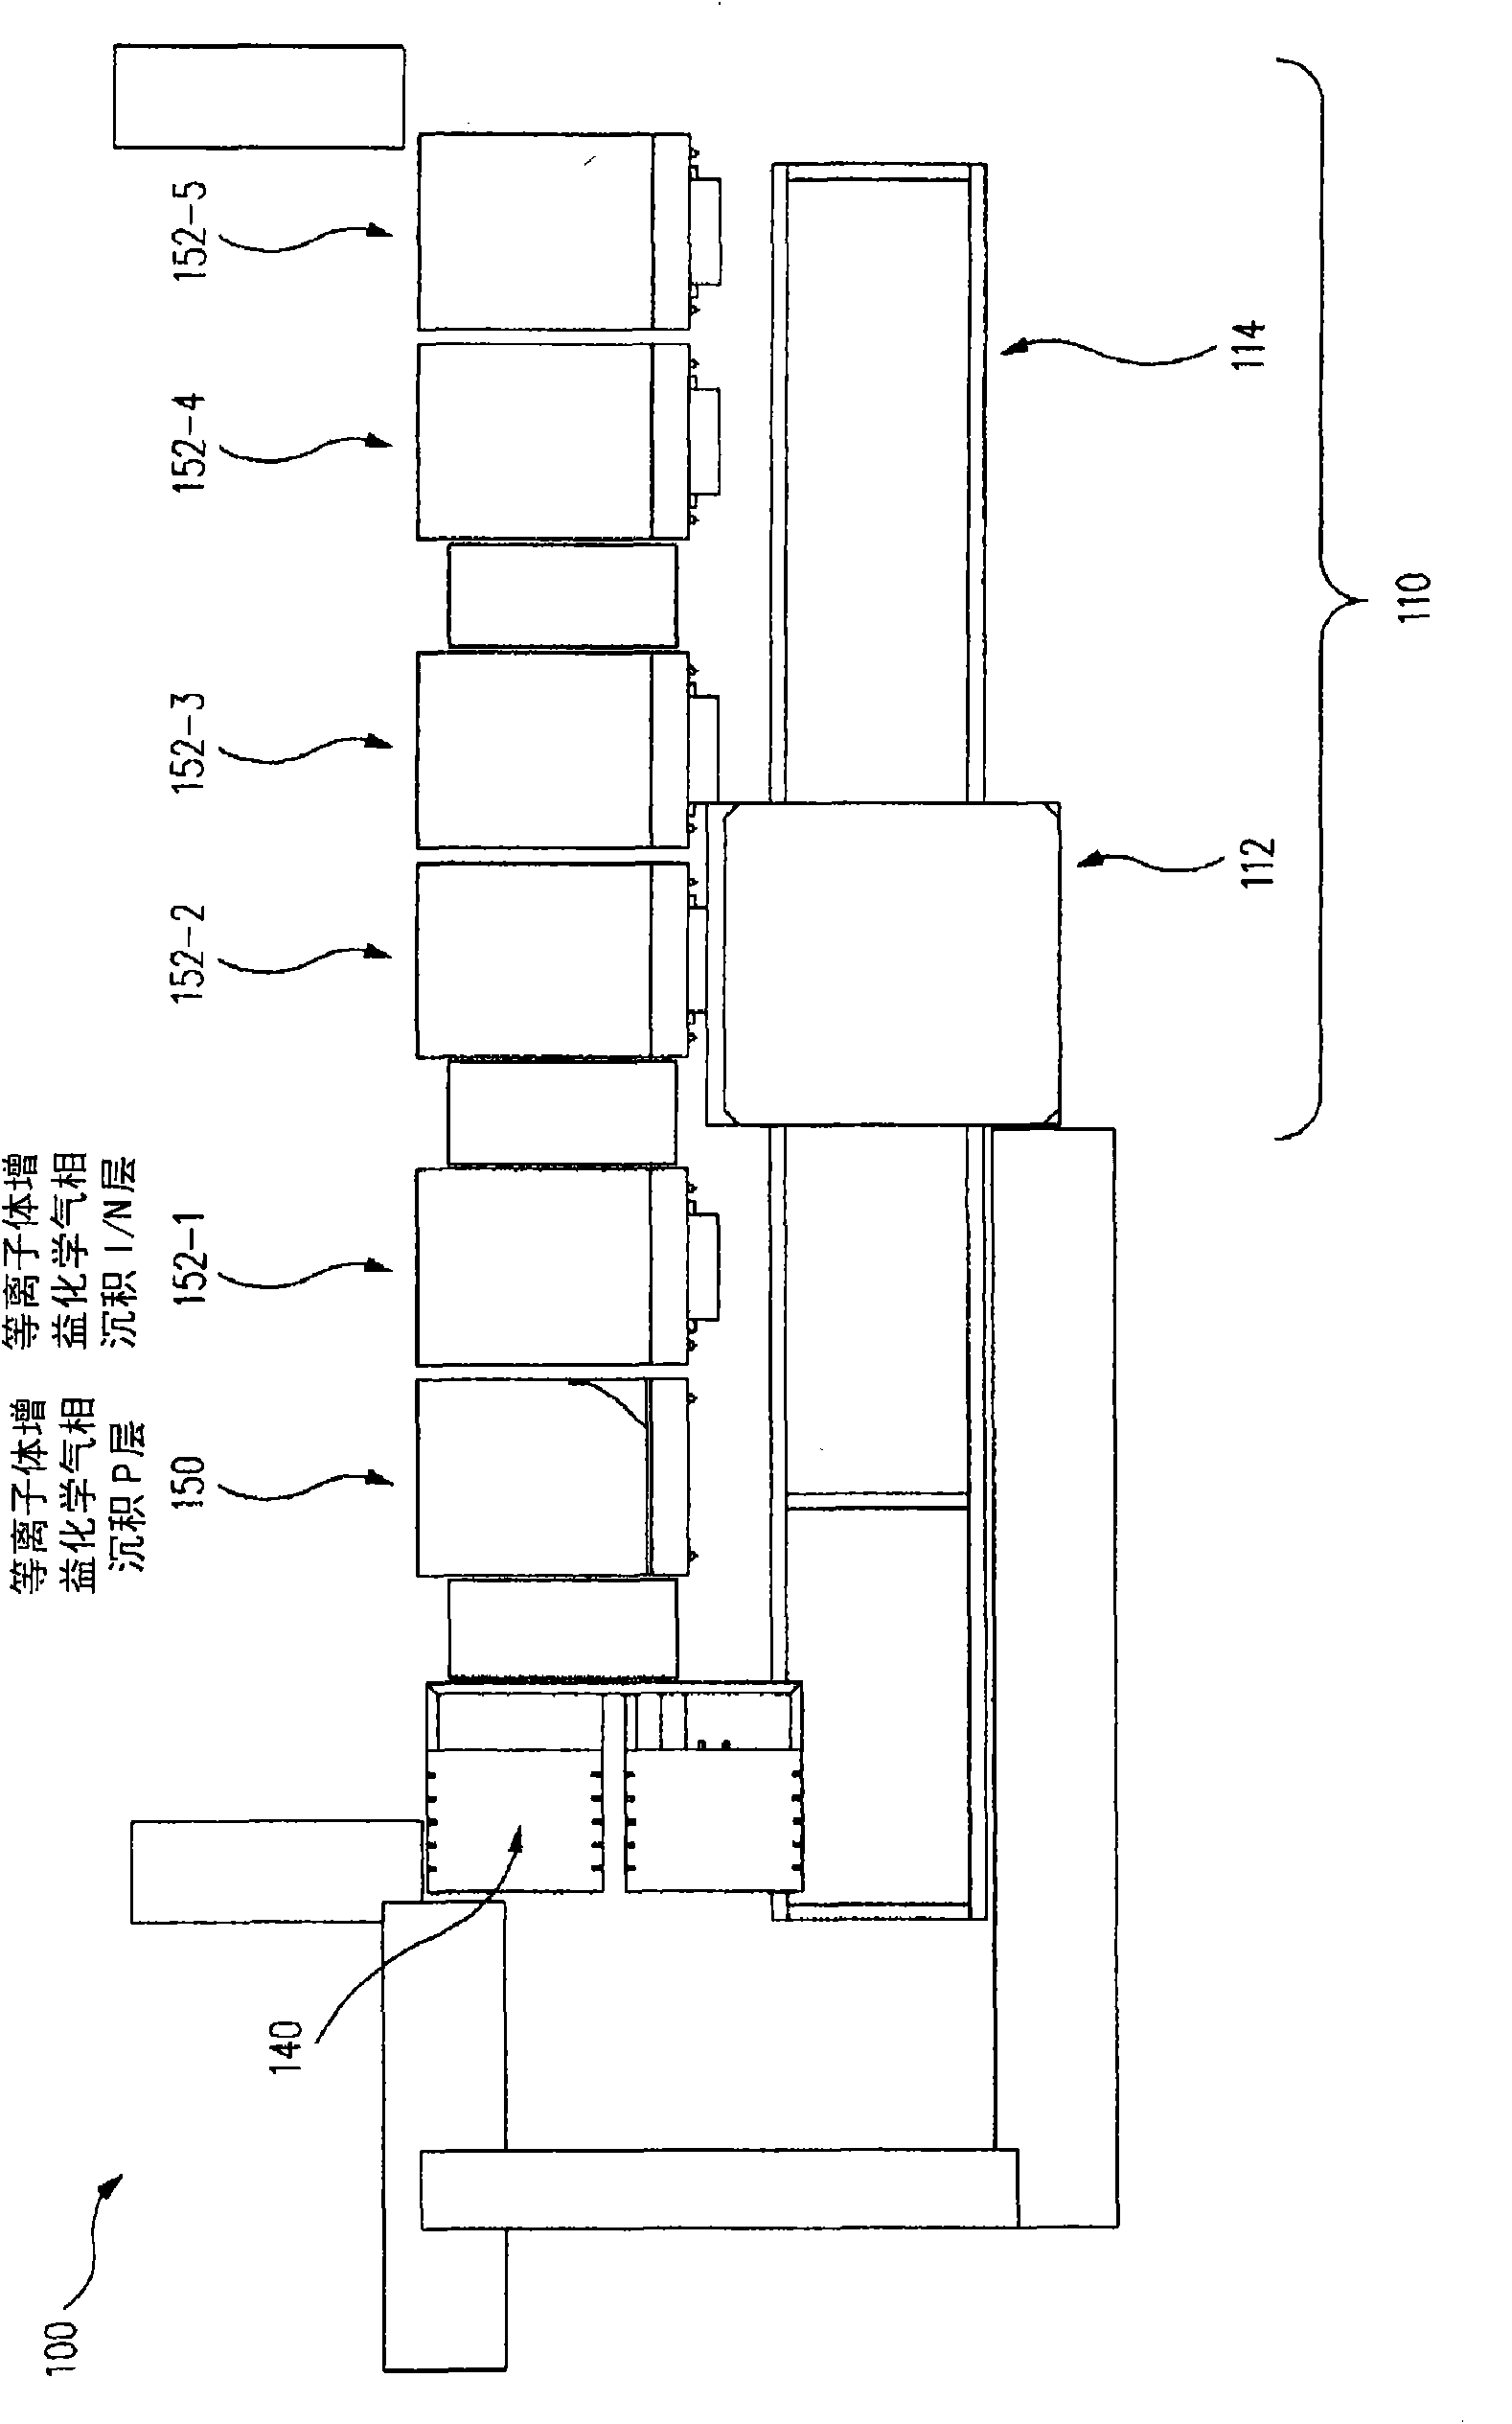 System for processing substrates, convey system and method and mobile transverse chamber